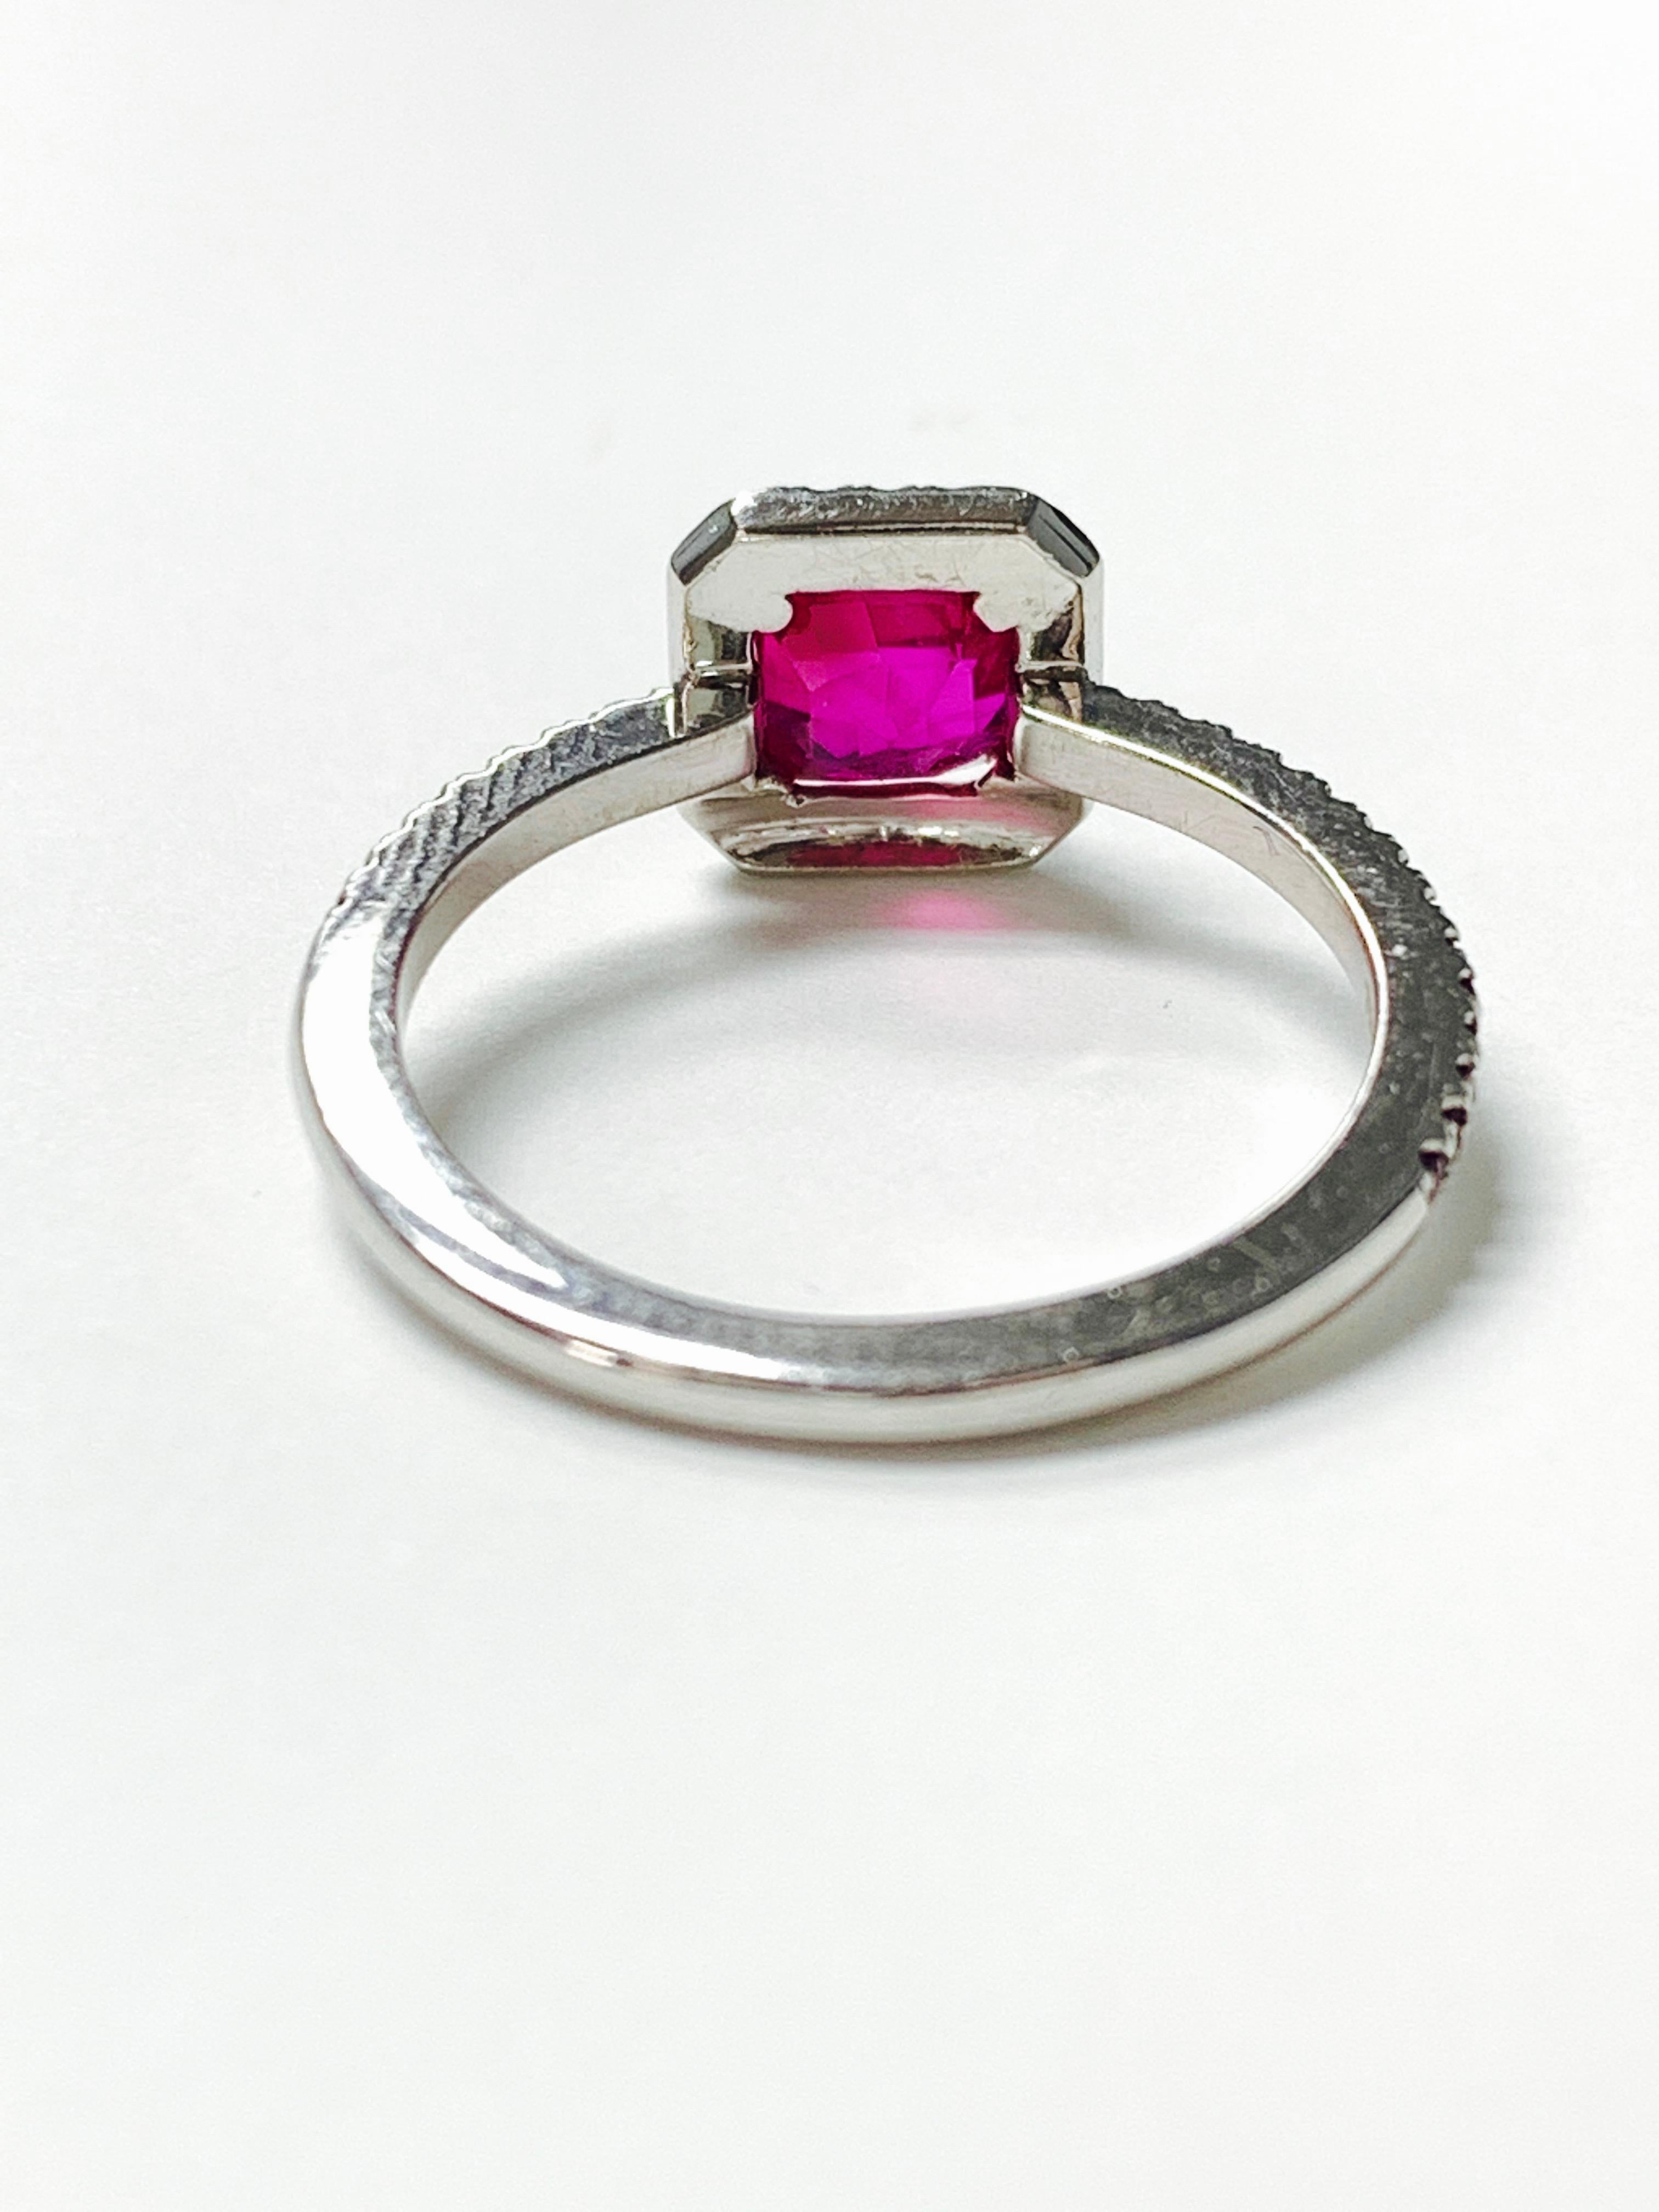 Women's or Men's Square Emerald Cut Ruby Ring in 18k White Gold